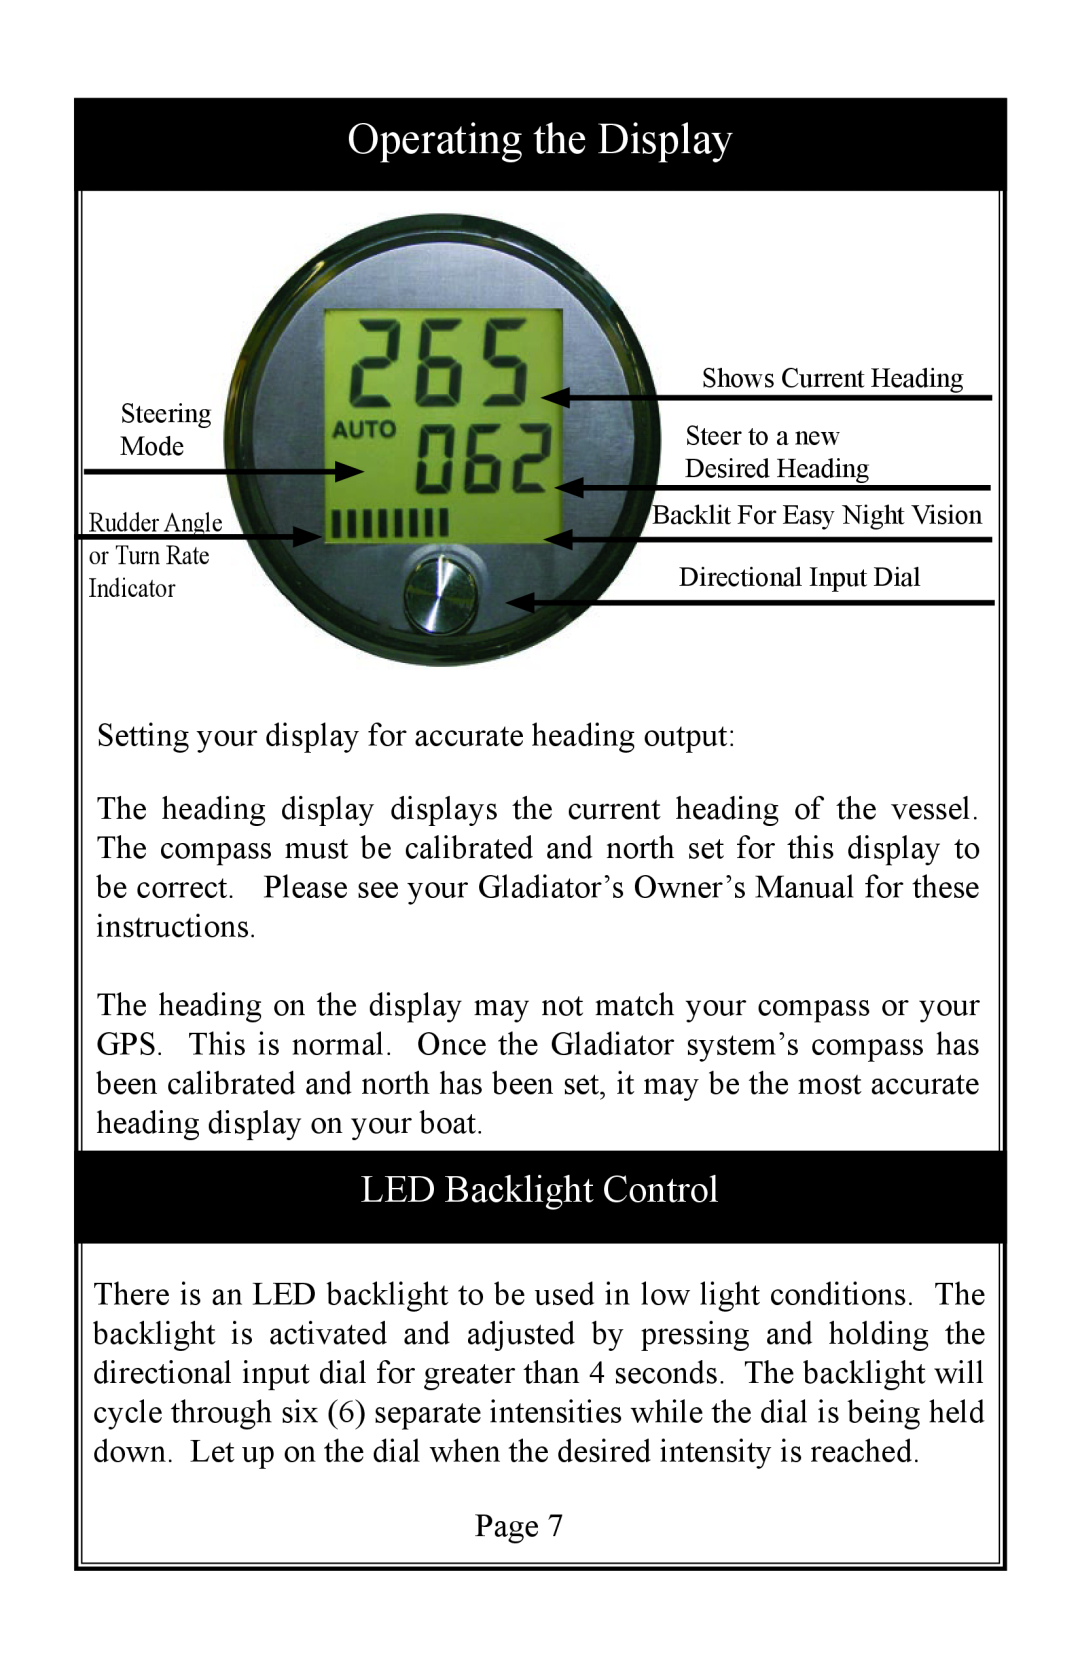 Garmin TR-1 owner manual Operating the Display, LED Backlight Control 